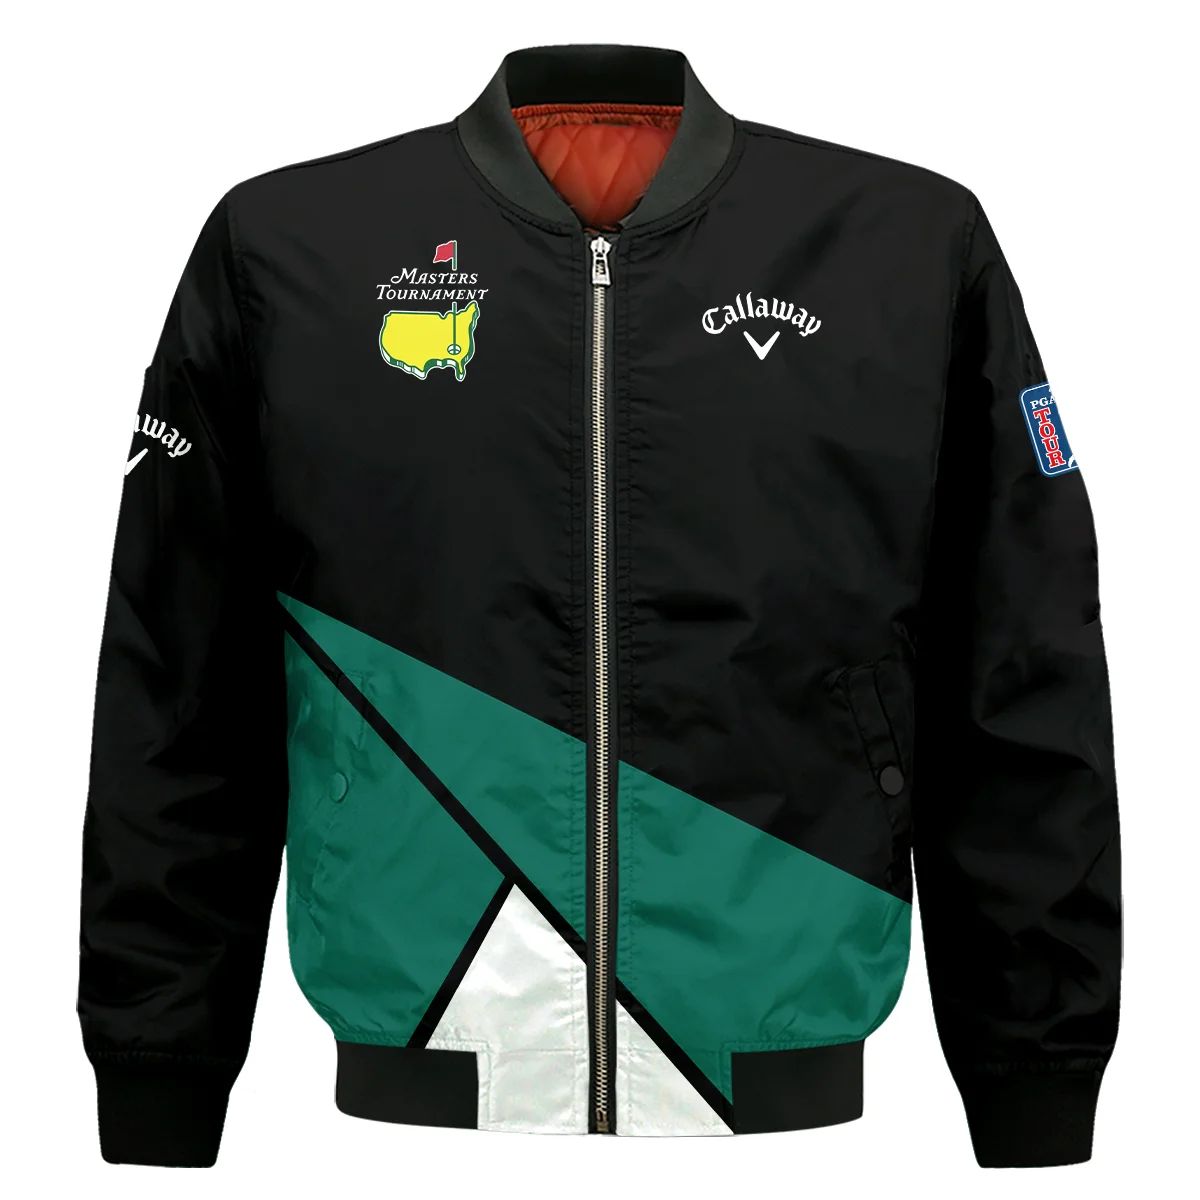 Golf Masters Tournament Callaway Bomber Jacket Black And Green Golf Sports Bomber Jacket GBJ1380